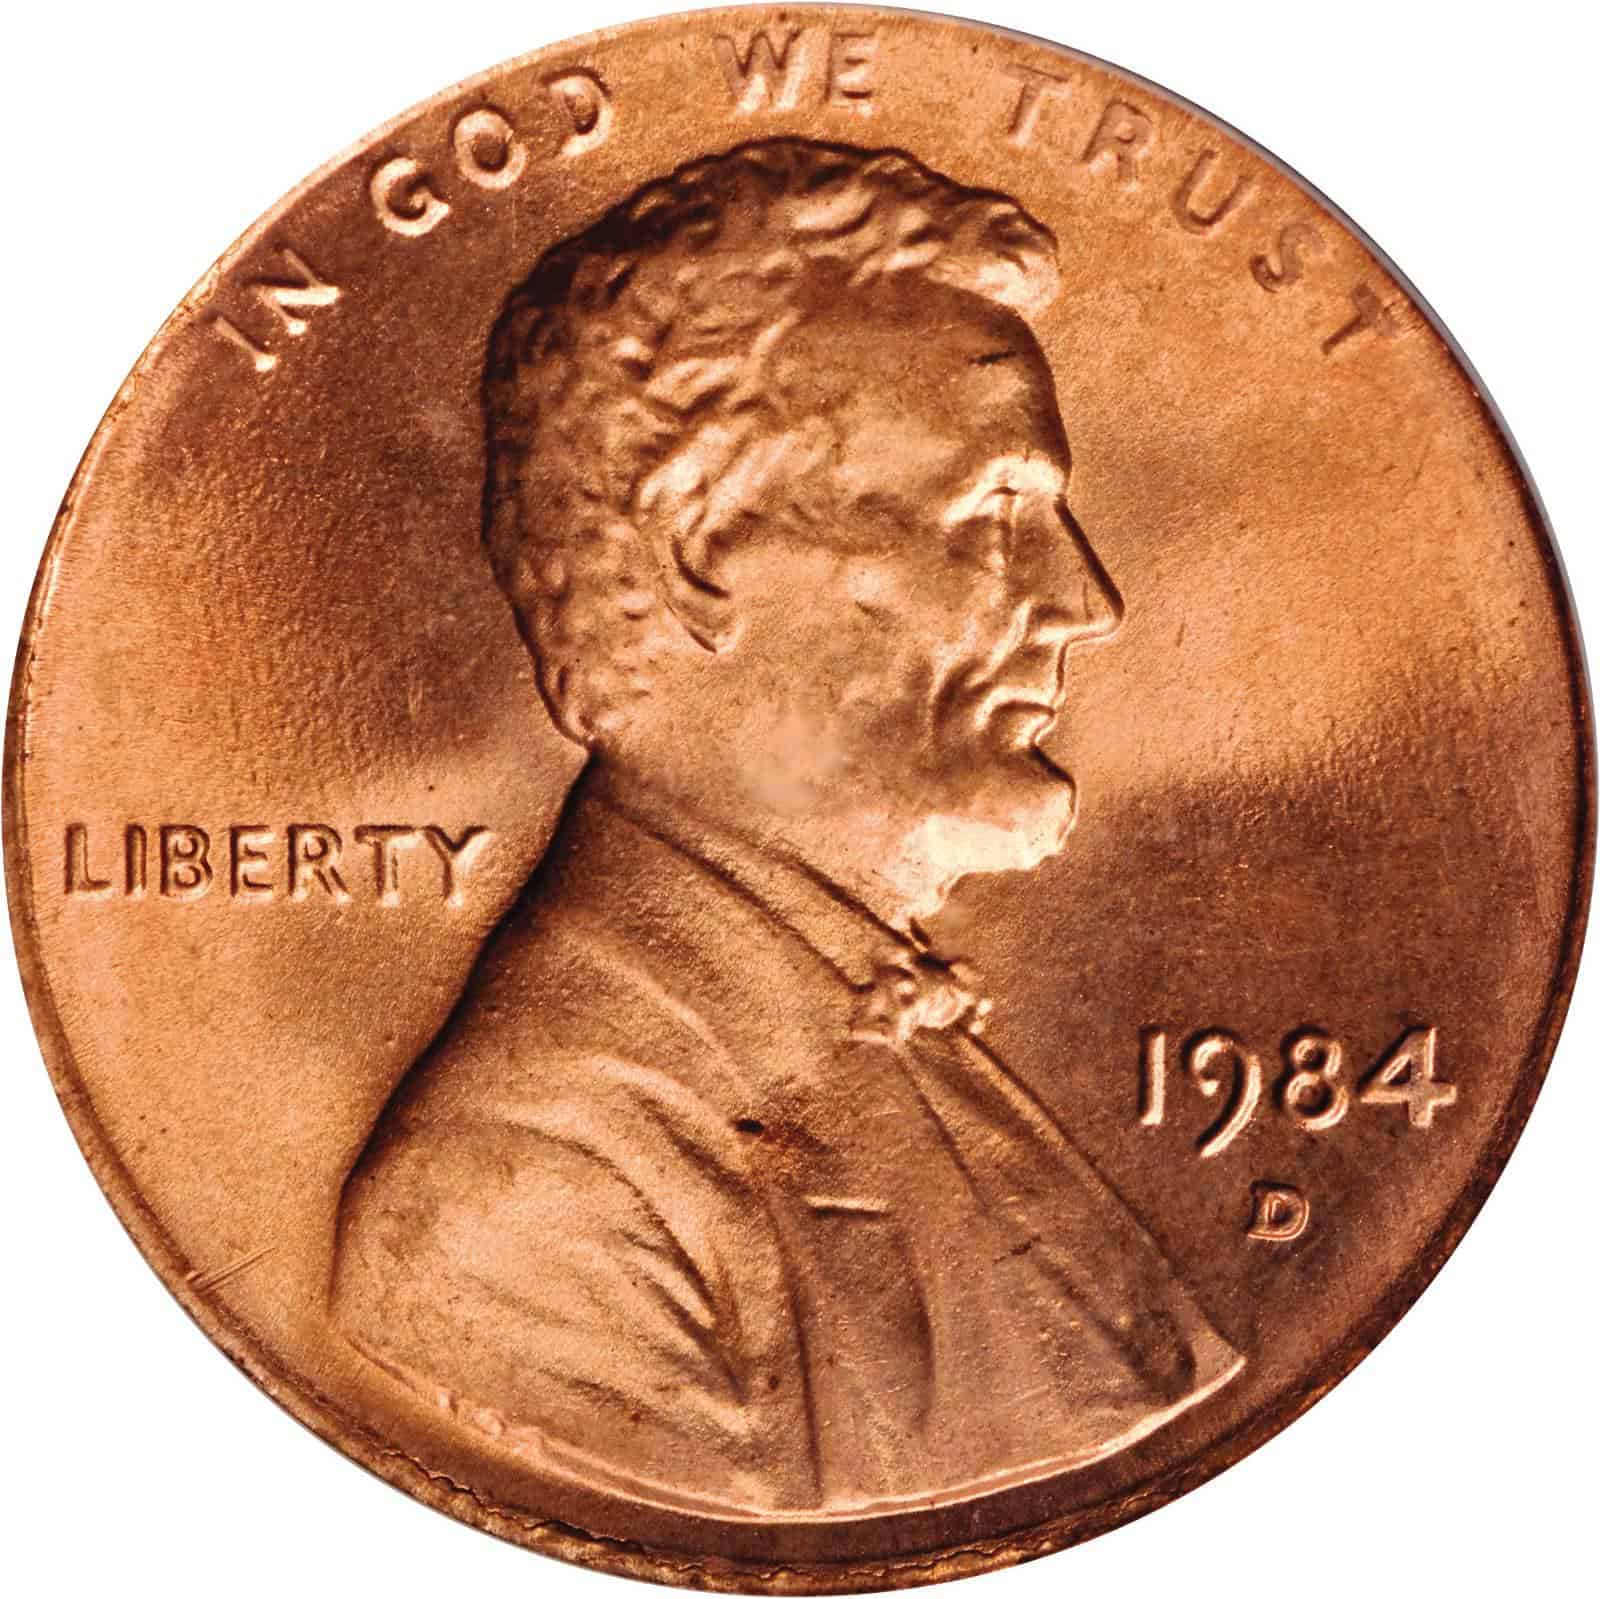 The obverse of the 1984 Lincoln penny